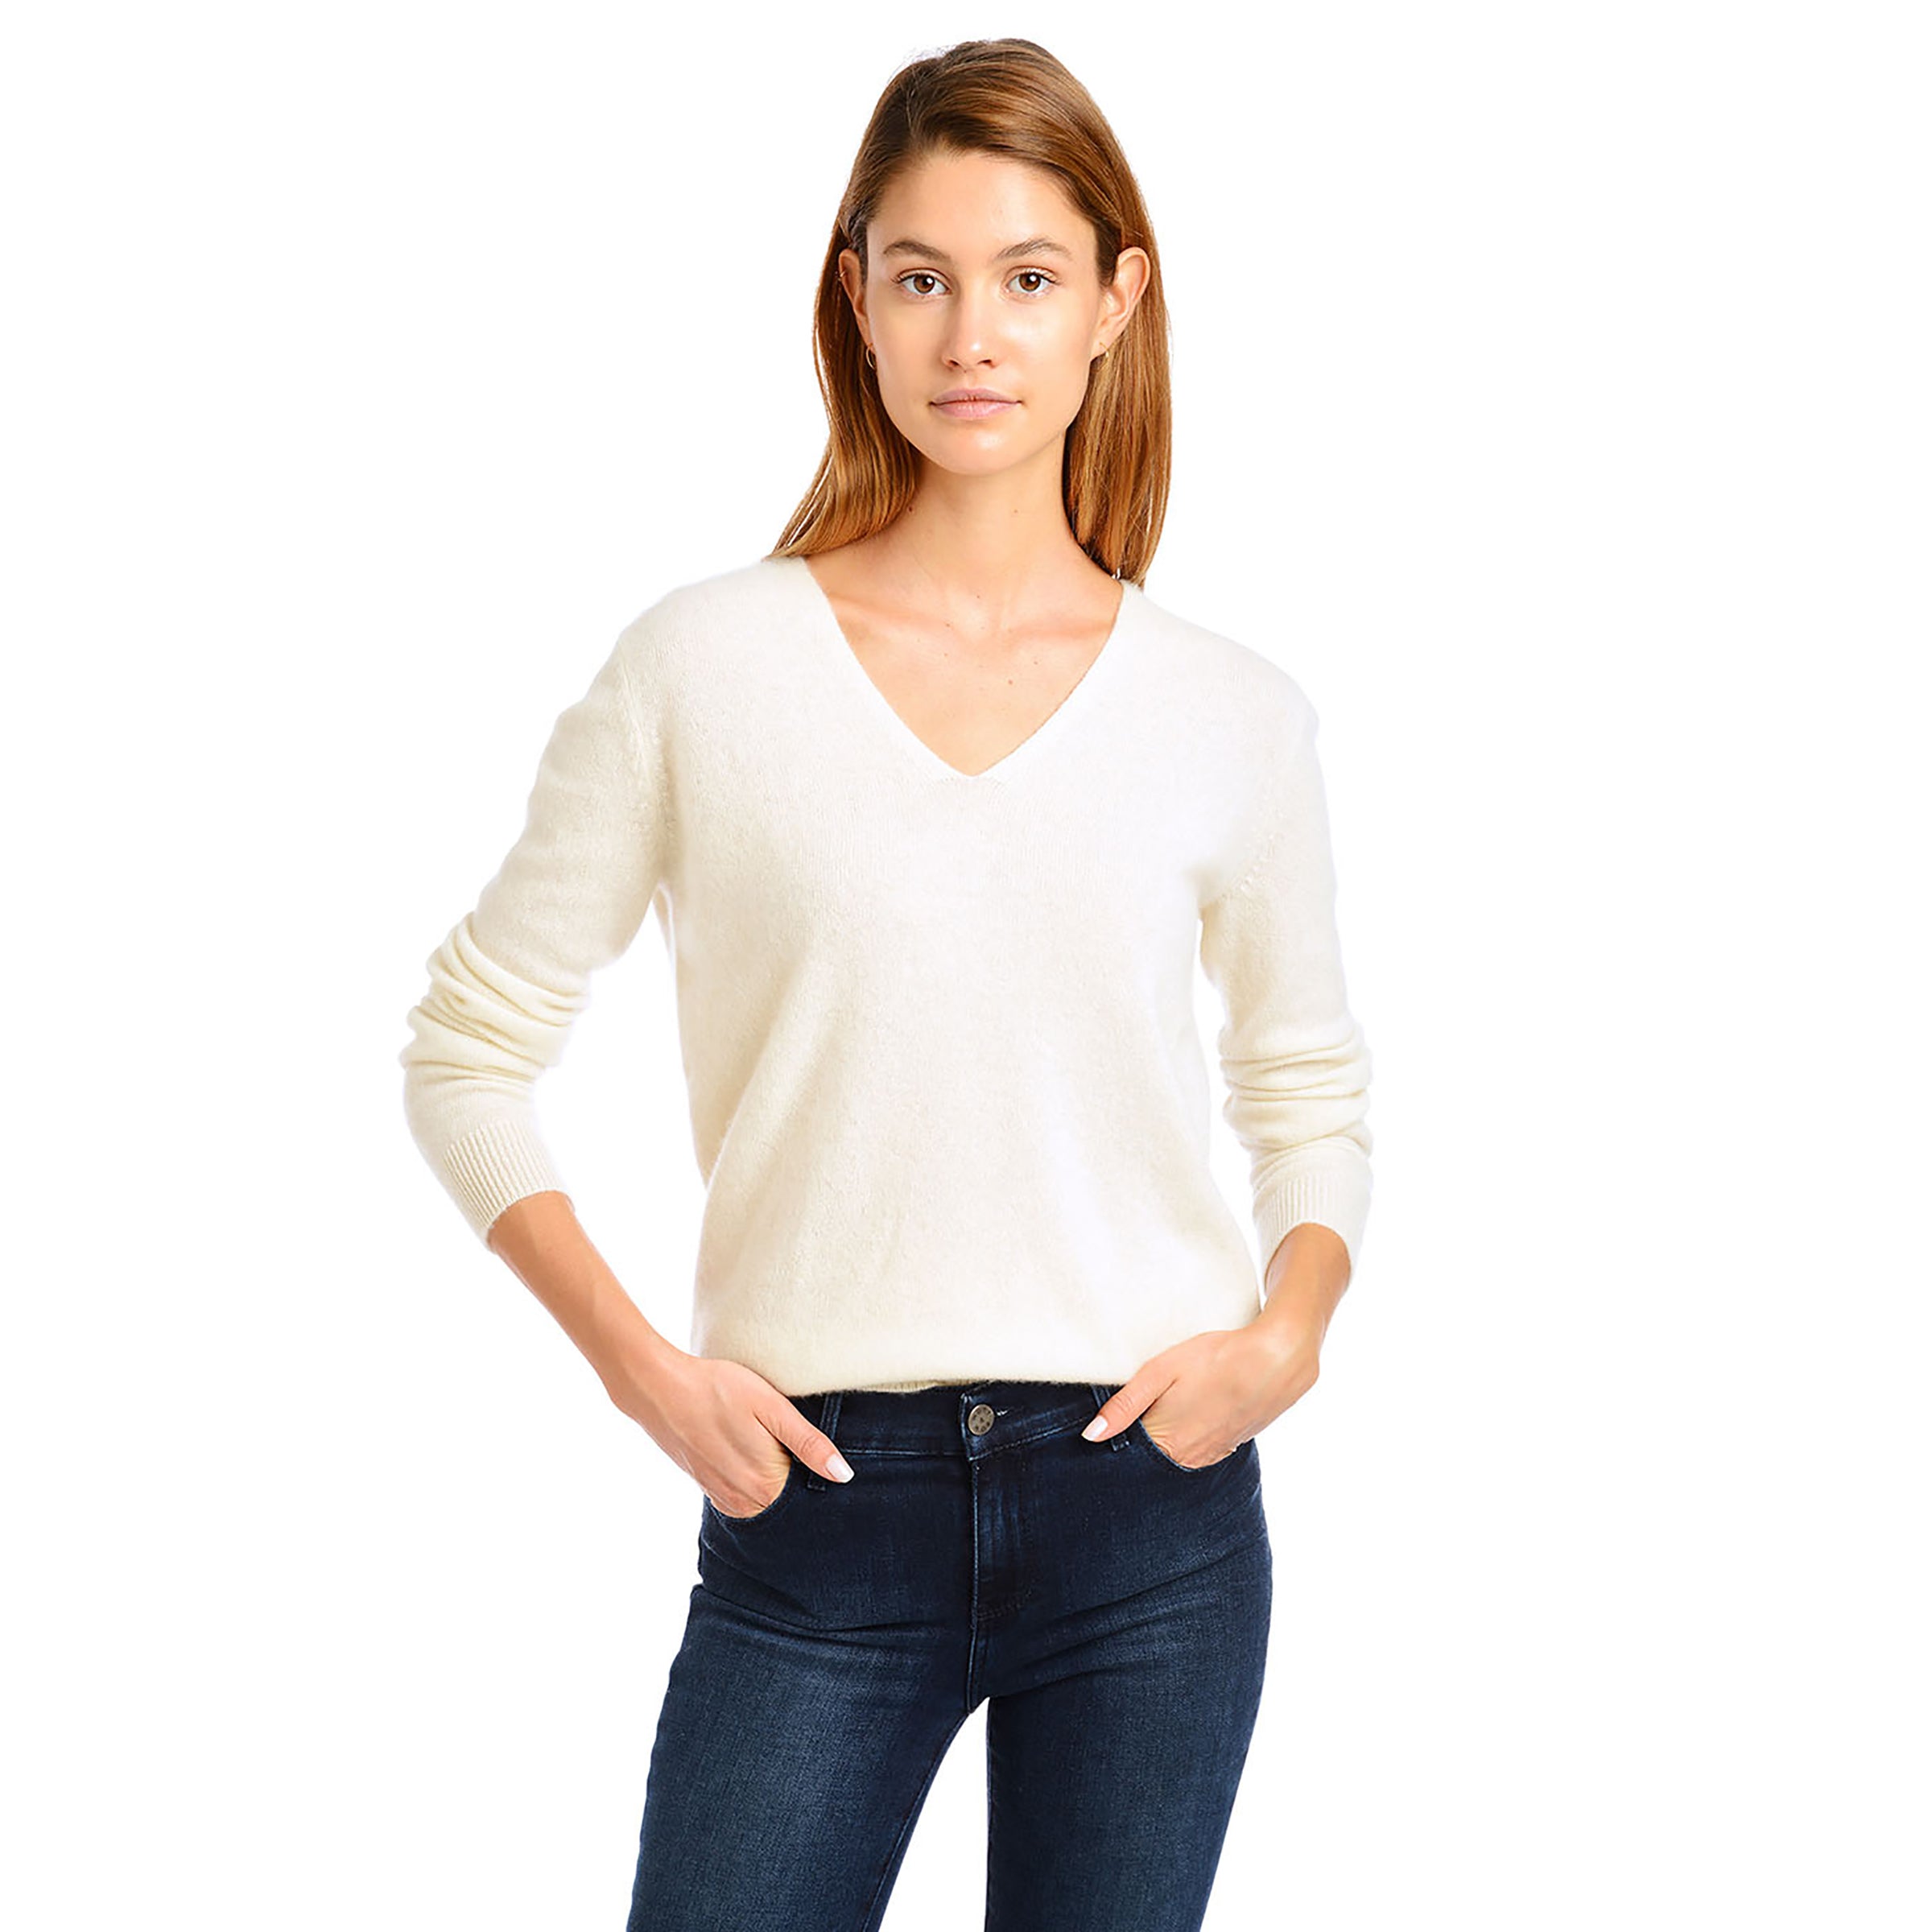 Women wearing Crema Cashmere Oversized V-Neck Willow Sweater